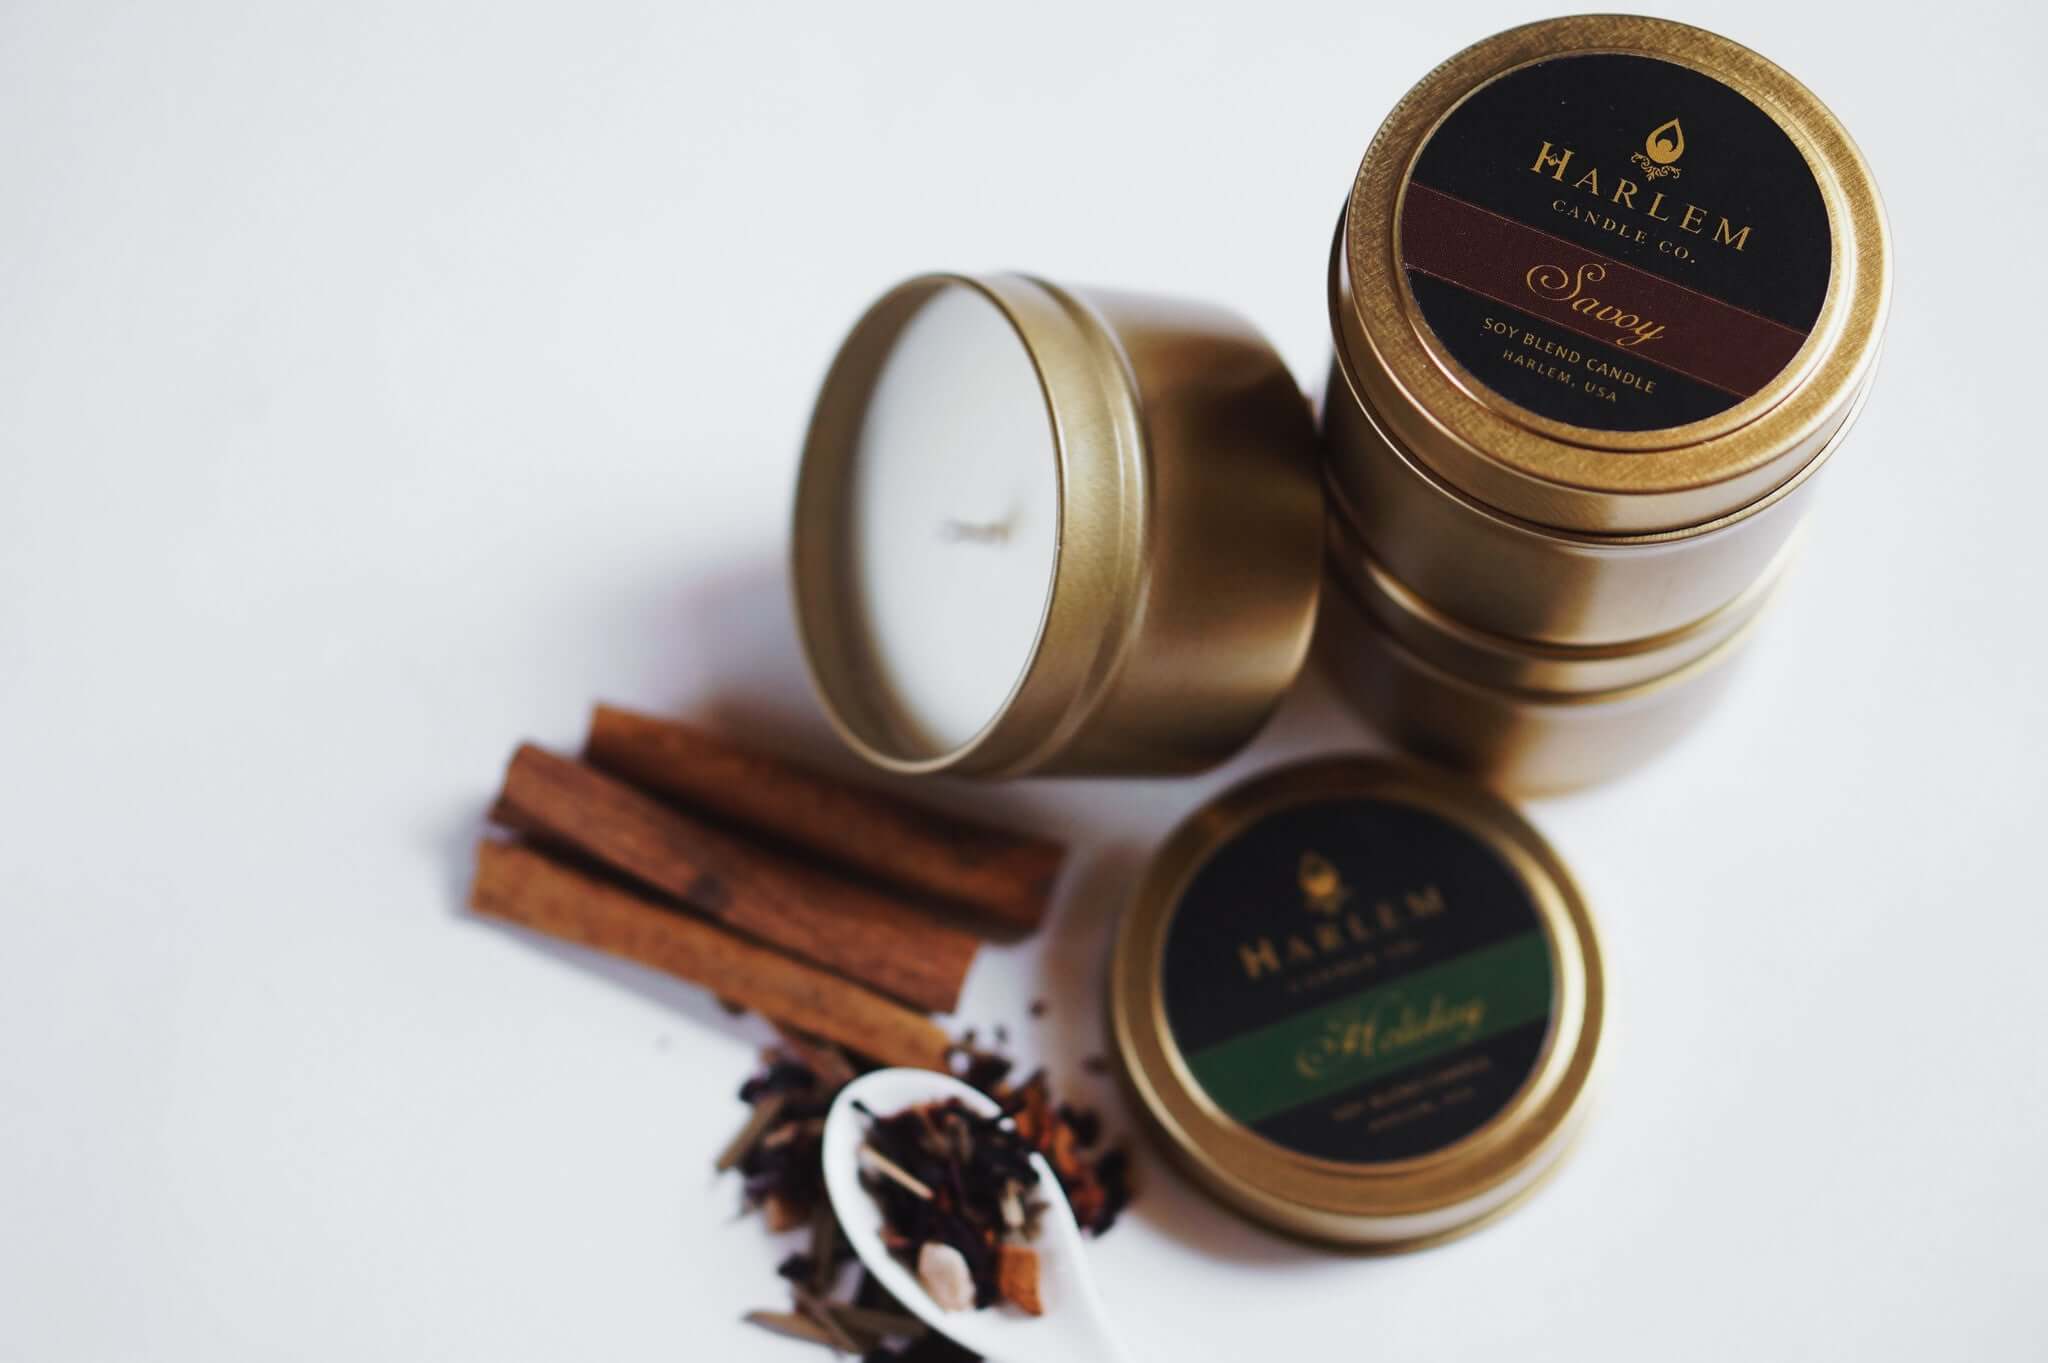 Our Savoy travel tin candle sitting on top of other travel tins displayed beautiful with cinnamon sticks on a white table.